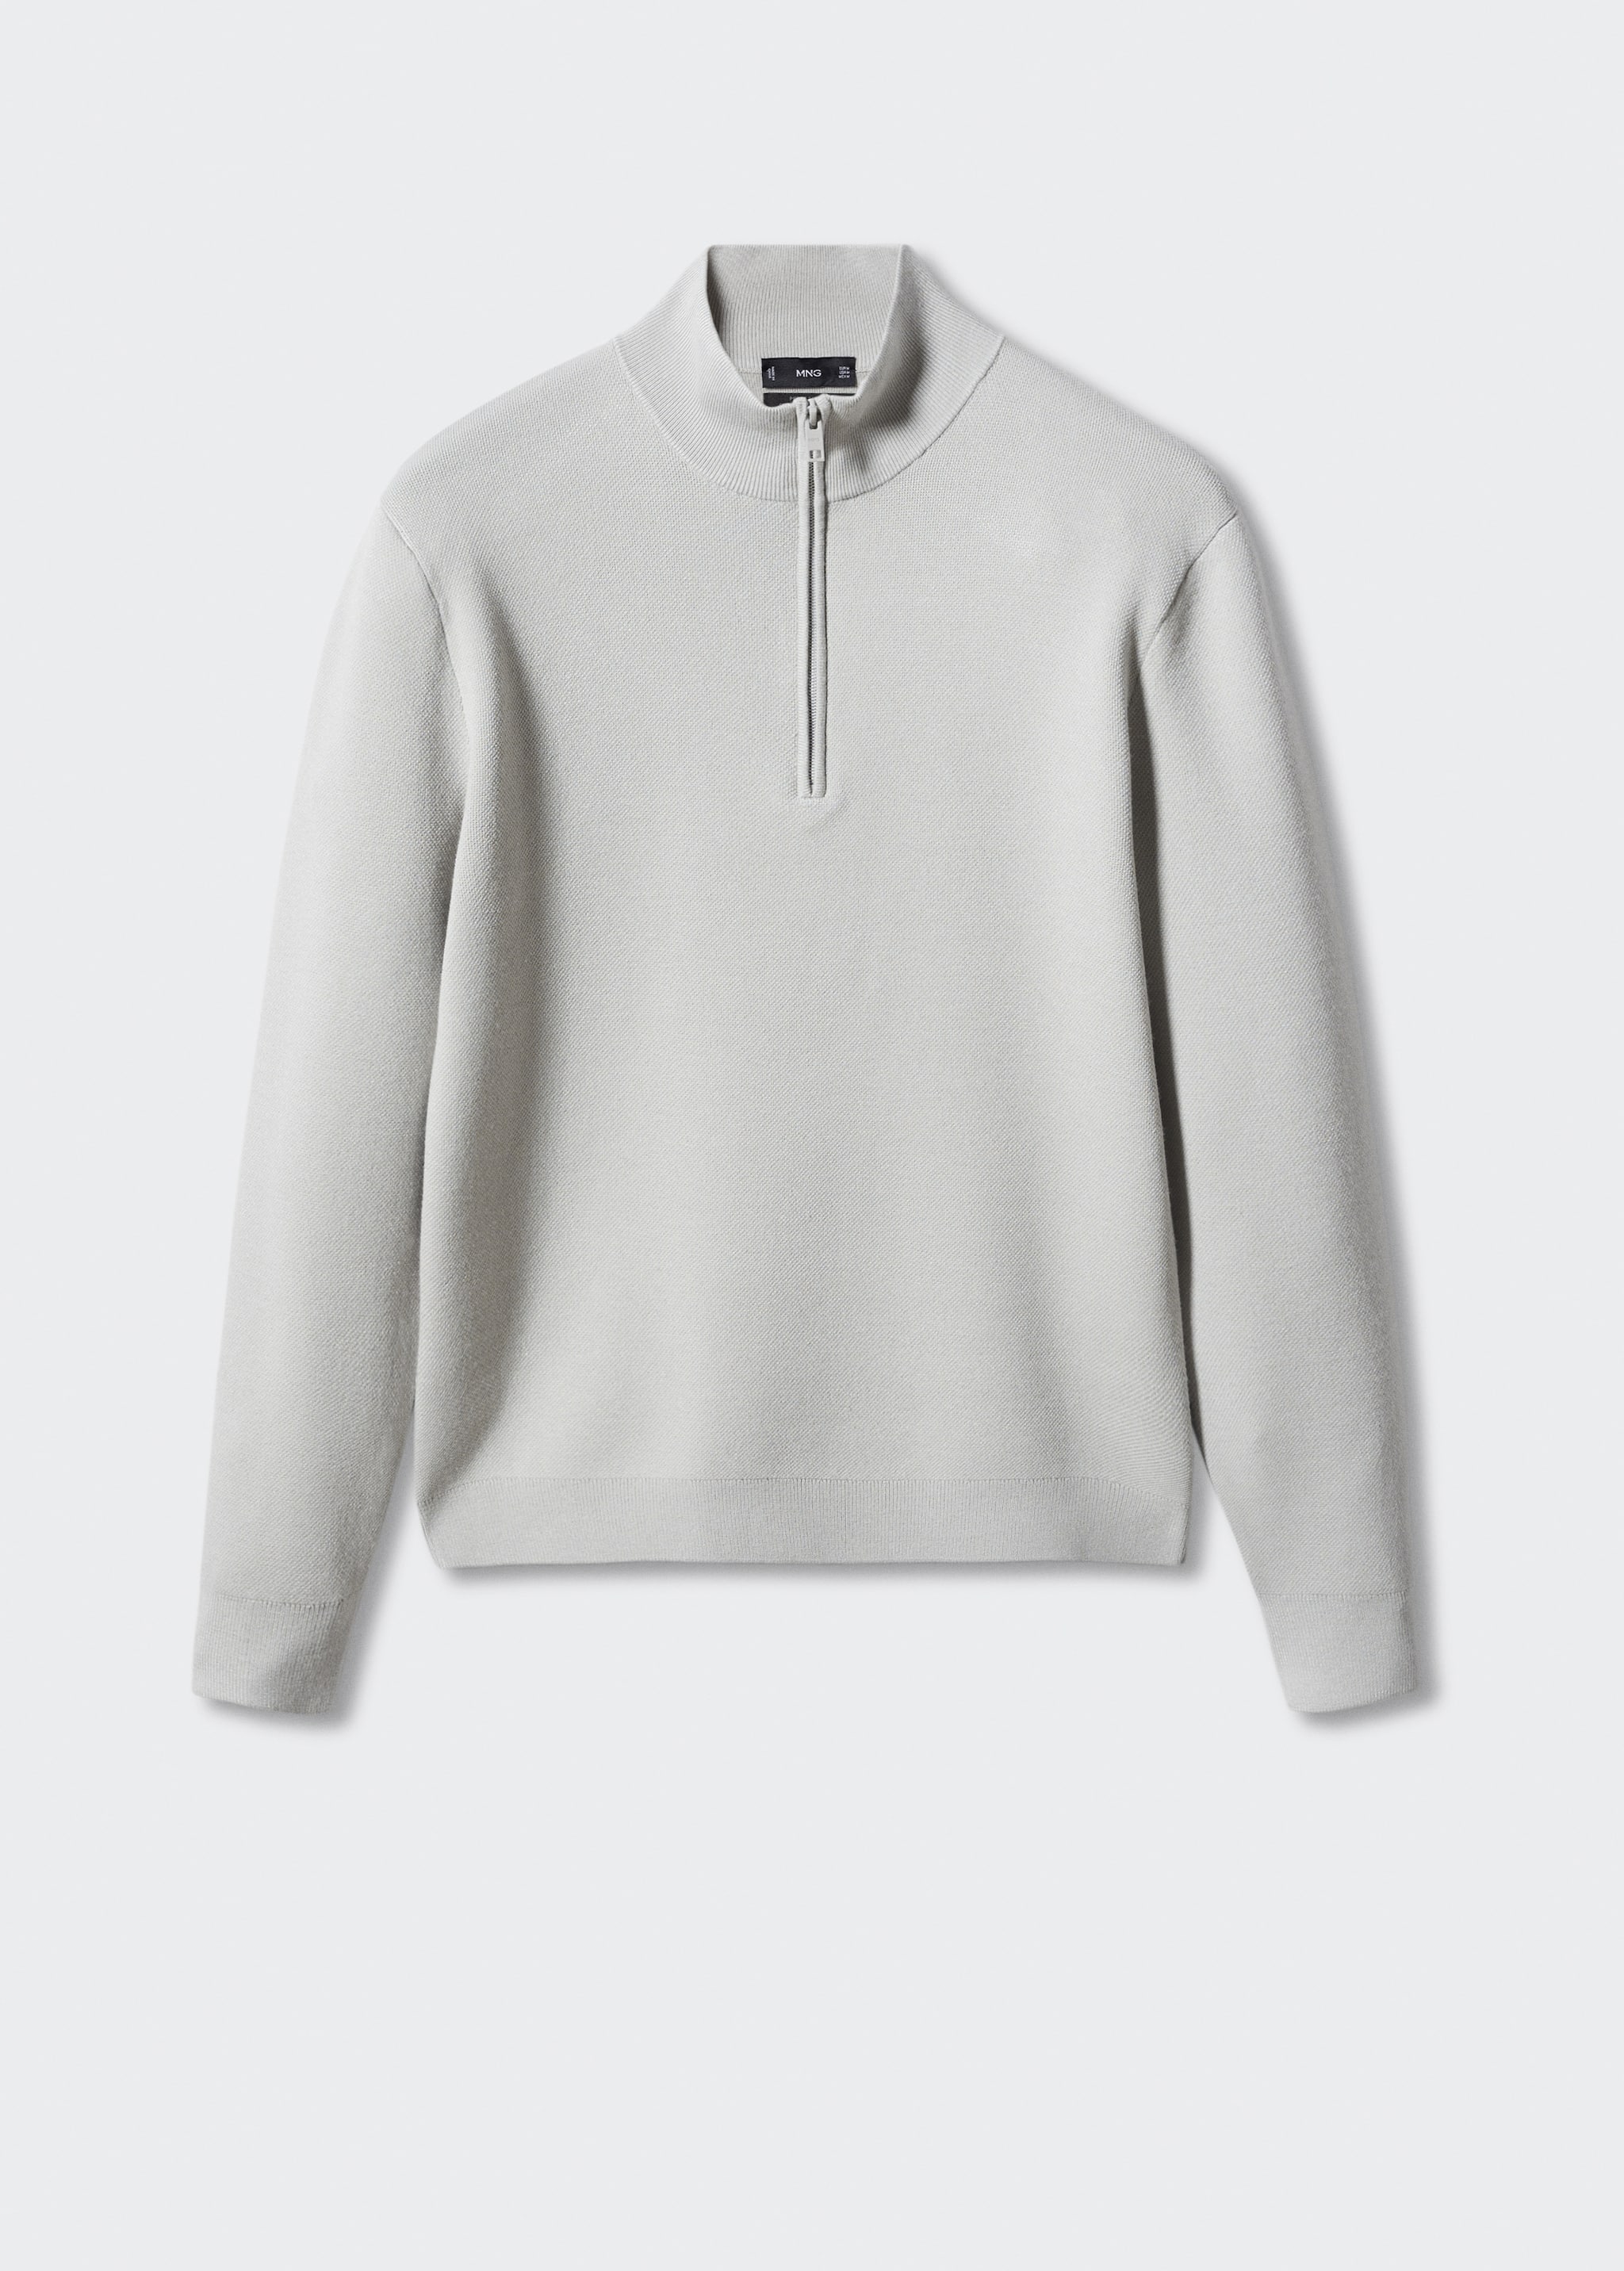 Breathable zip-neck sweater - Article without model